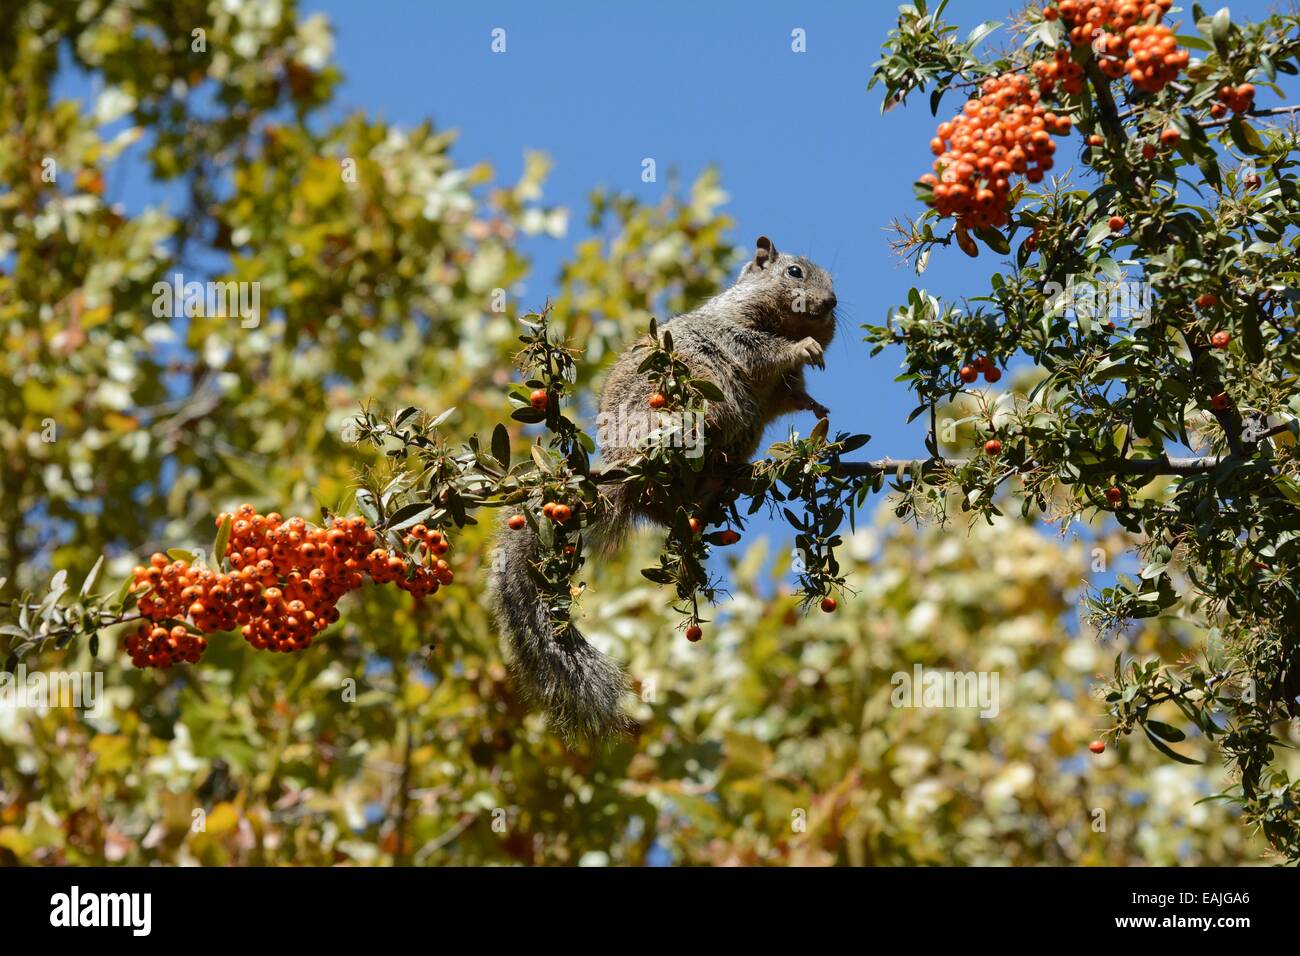 Rock Squirrel stuffing himself with berries Stock Photo